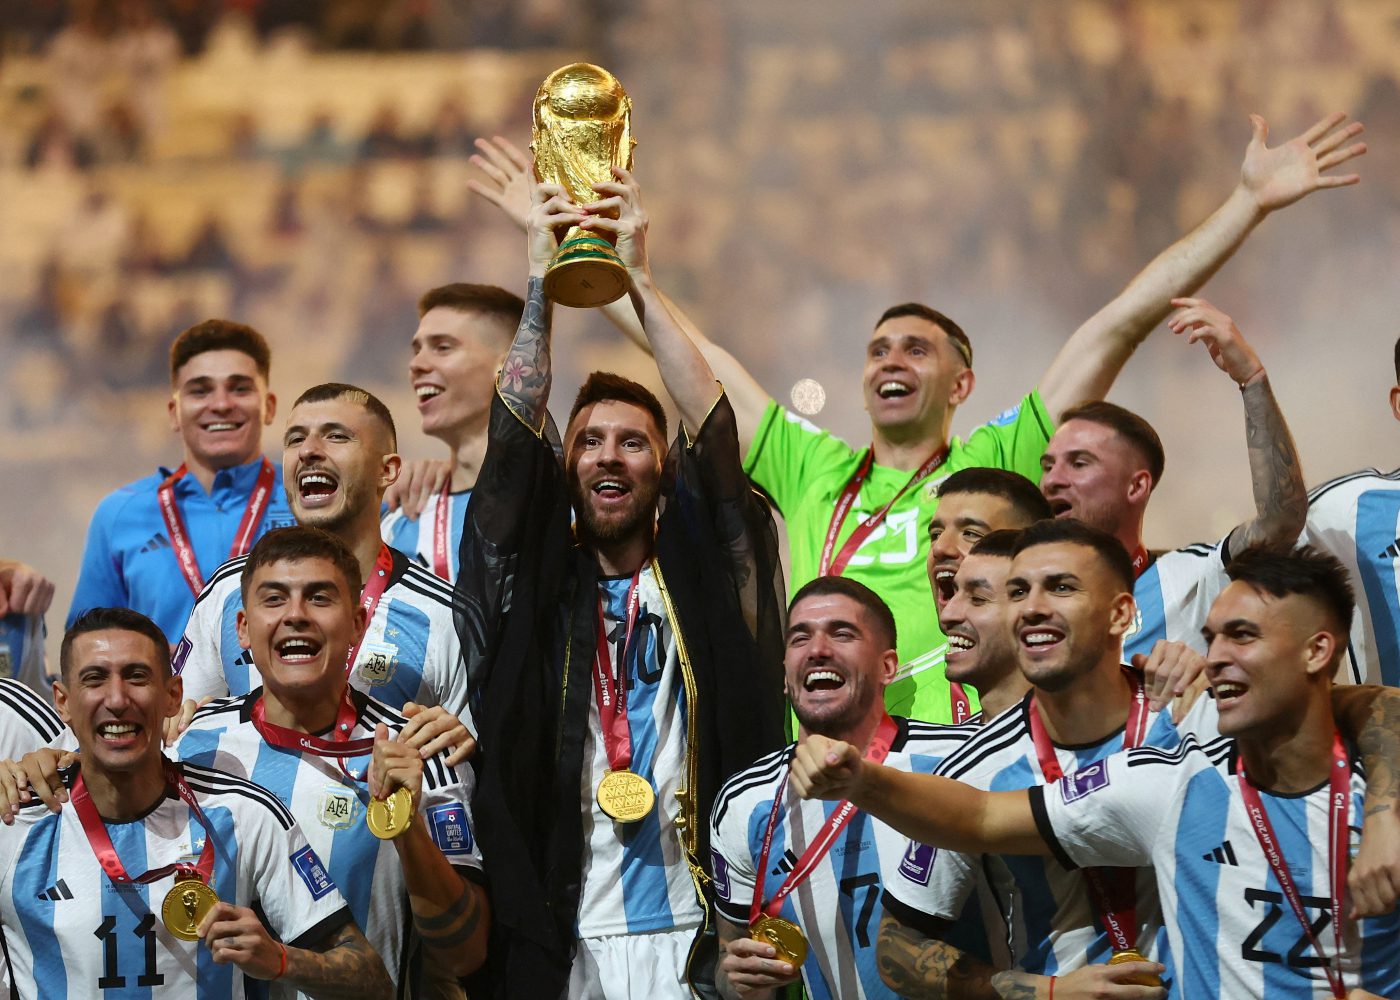 World champions Argentina reach the top of the FIFA rankings for the first time in 6 years